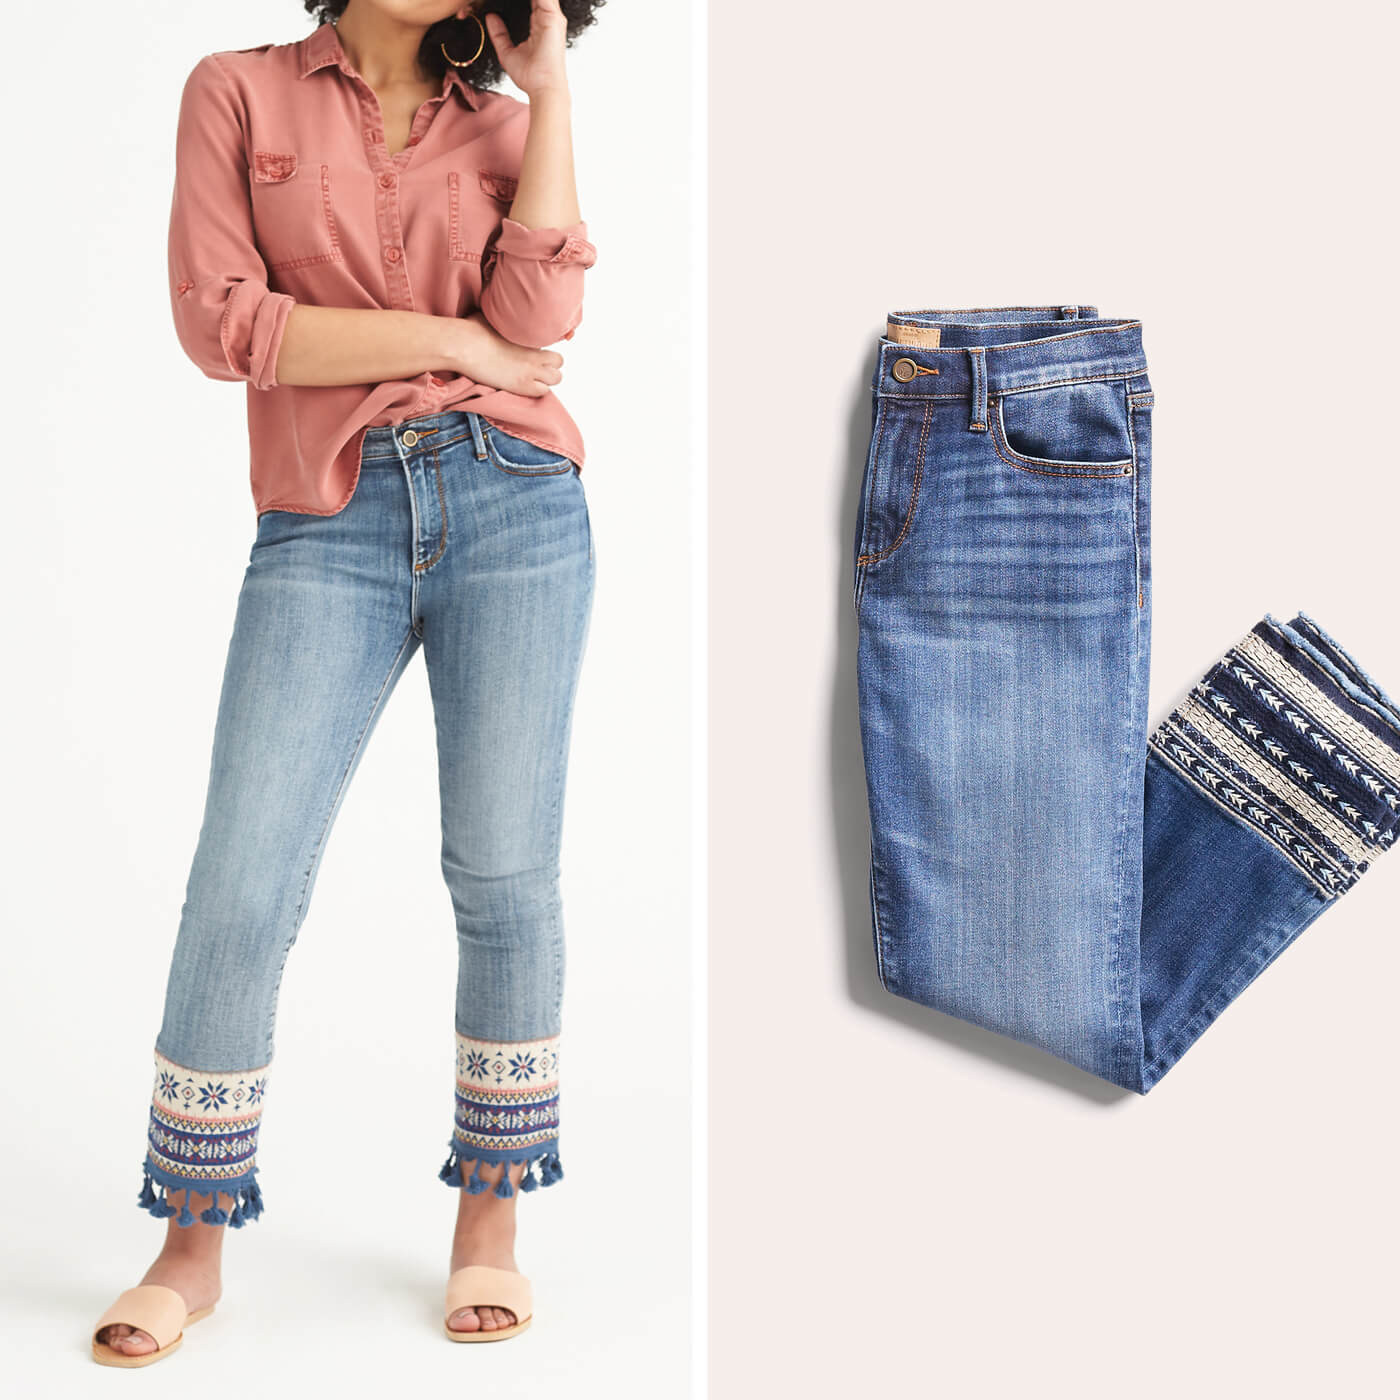 Will low-rise jeans take off this time? – Low-rise jeans are back for 2018